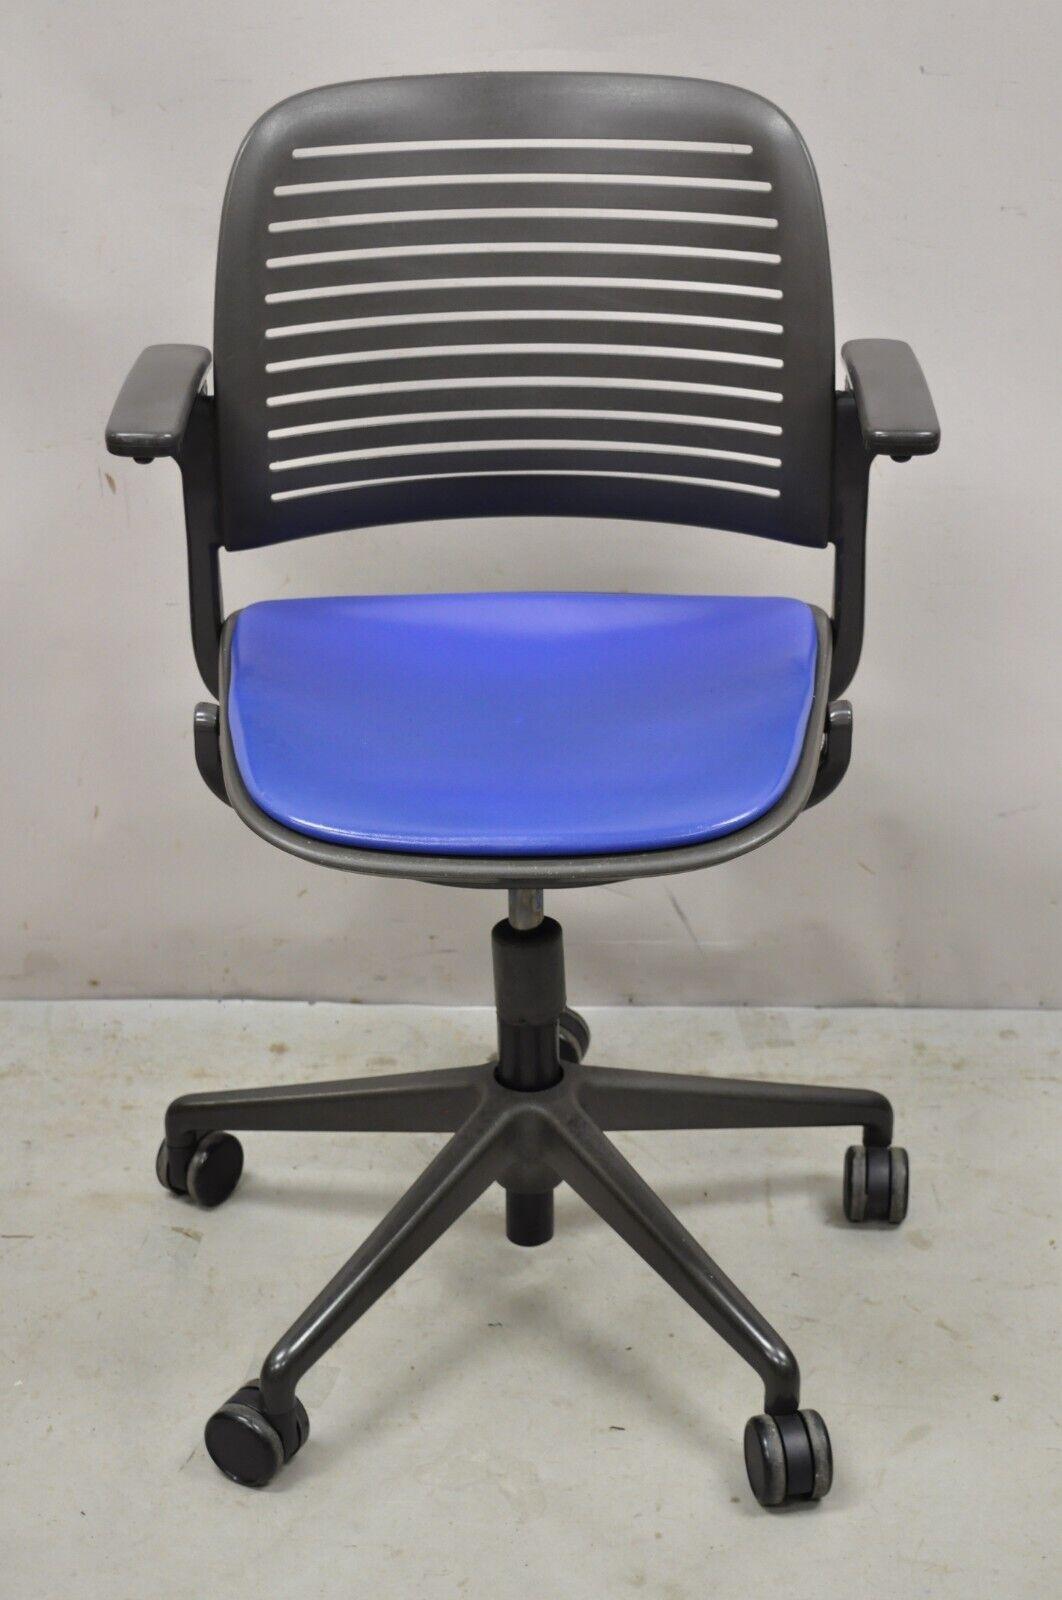 Steelcase 487 Cachet Swivel Office Desk Chair with Blue Seat. Item featured is adjustable in height, blue seat, rolling casters, lift up armrests, original label, great style and form. Measurements: 37